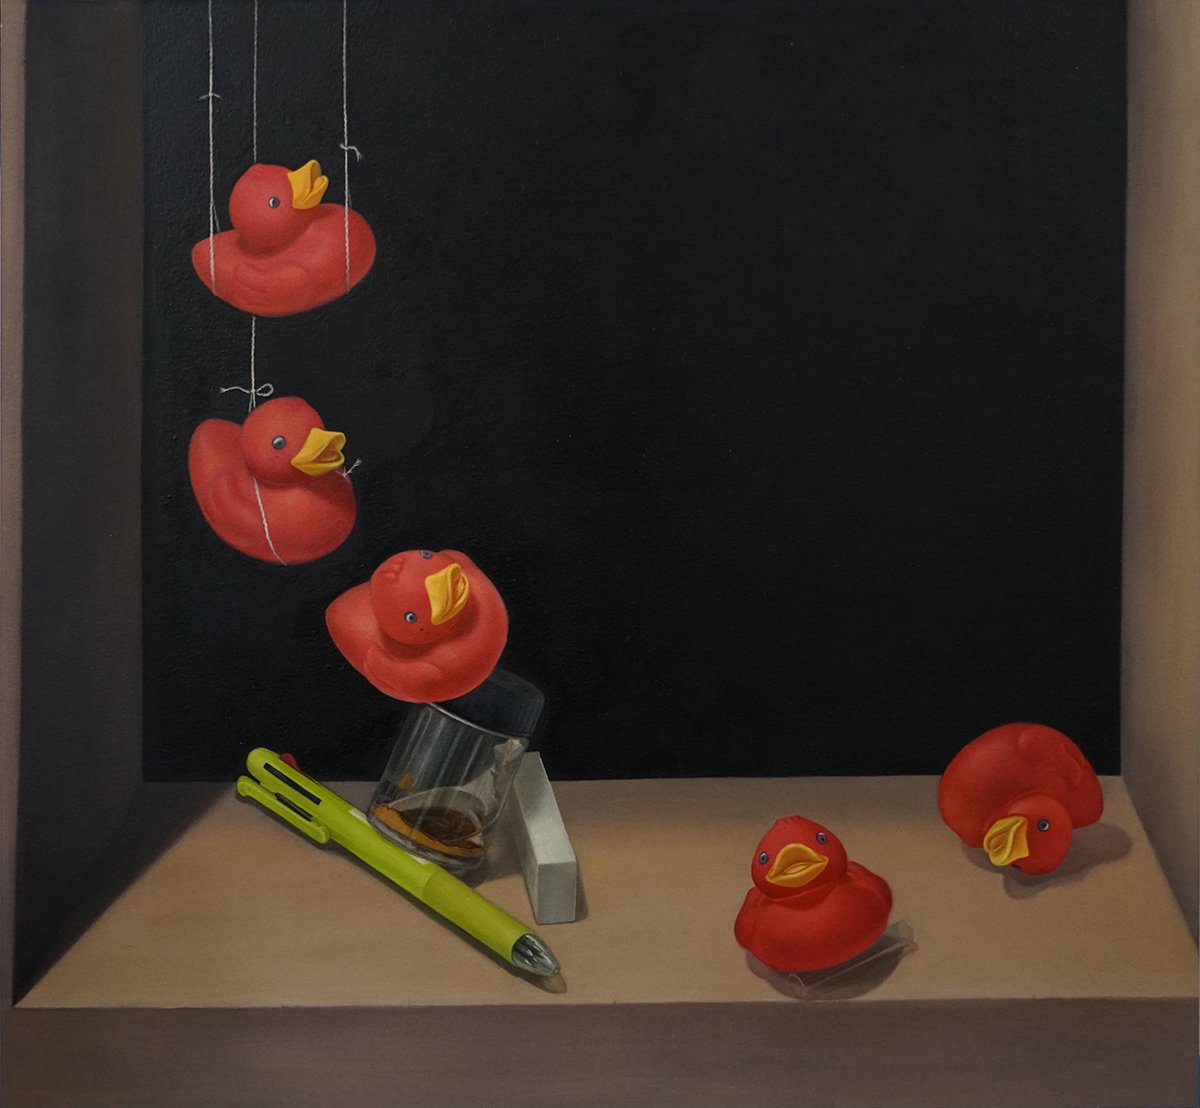 MiHee Nahm, "Committing to Memory_Ducky from RDK"; Oil on illustration board; 12 7/8" x 14"